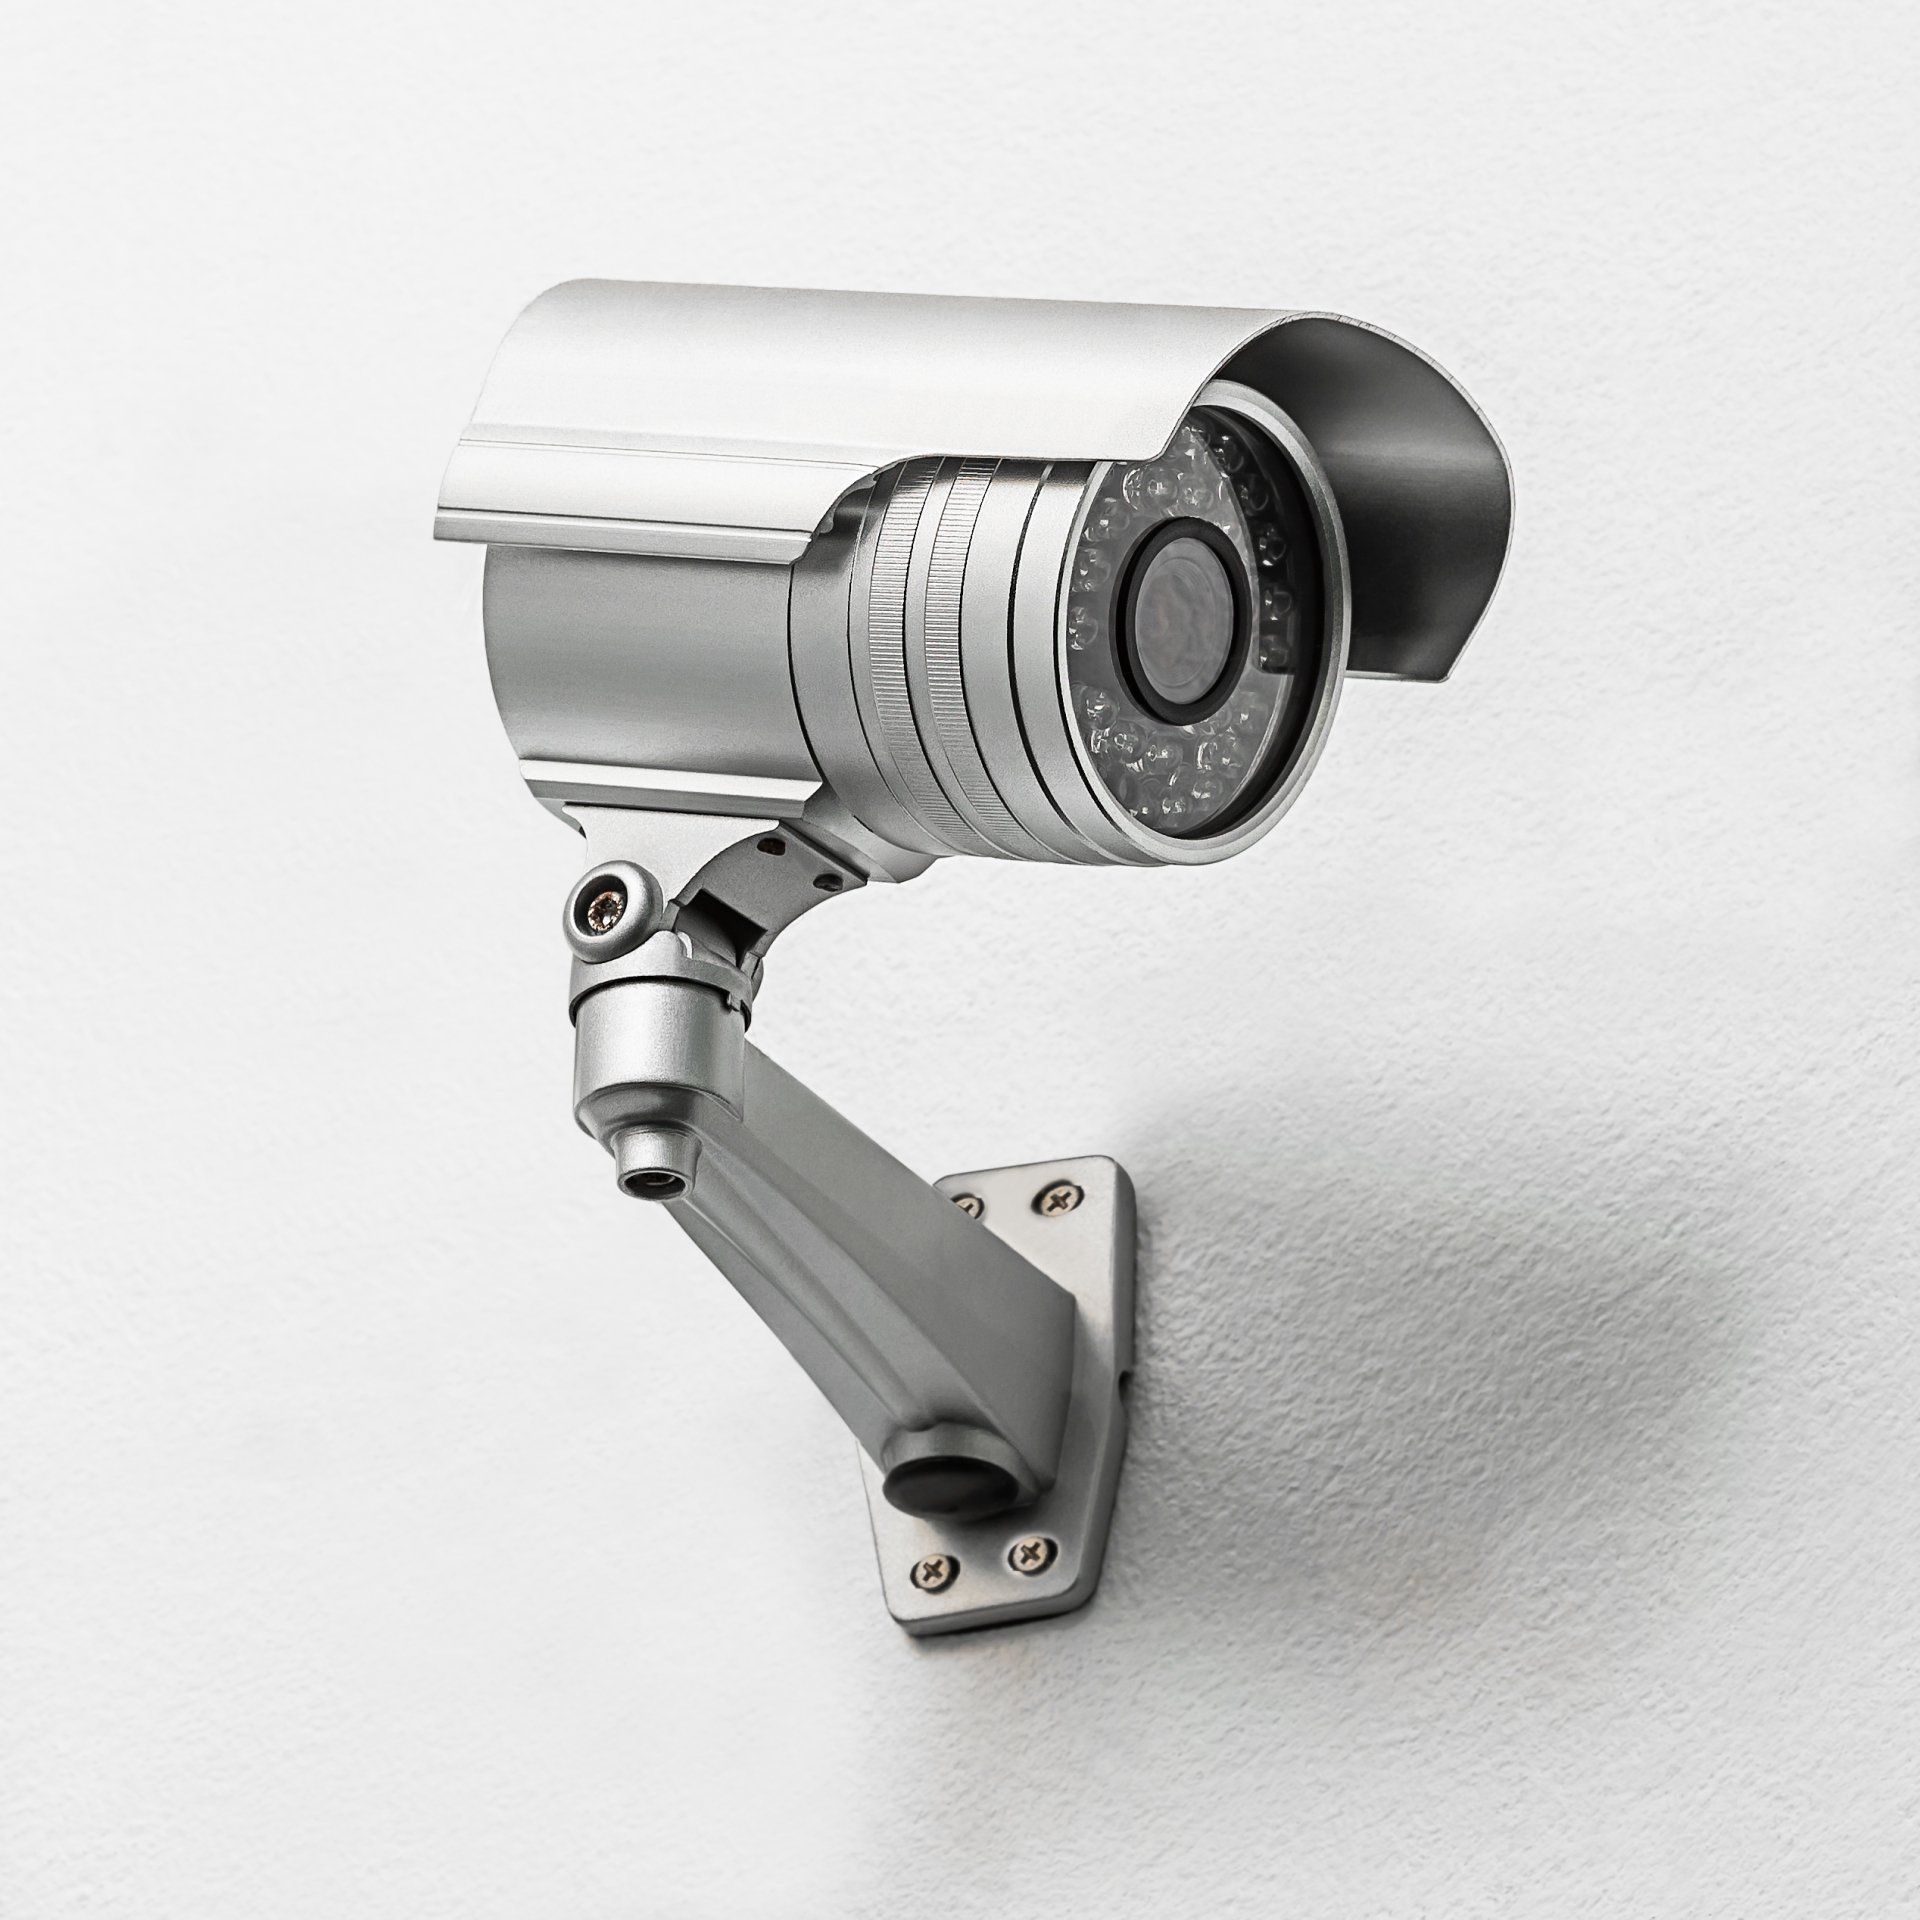 Modern security camera fix on the indoor concrete wall